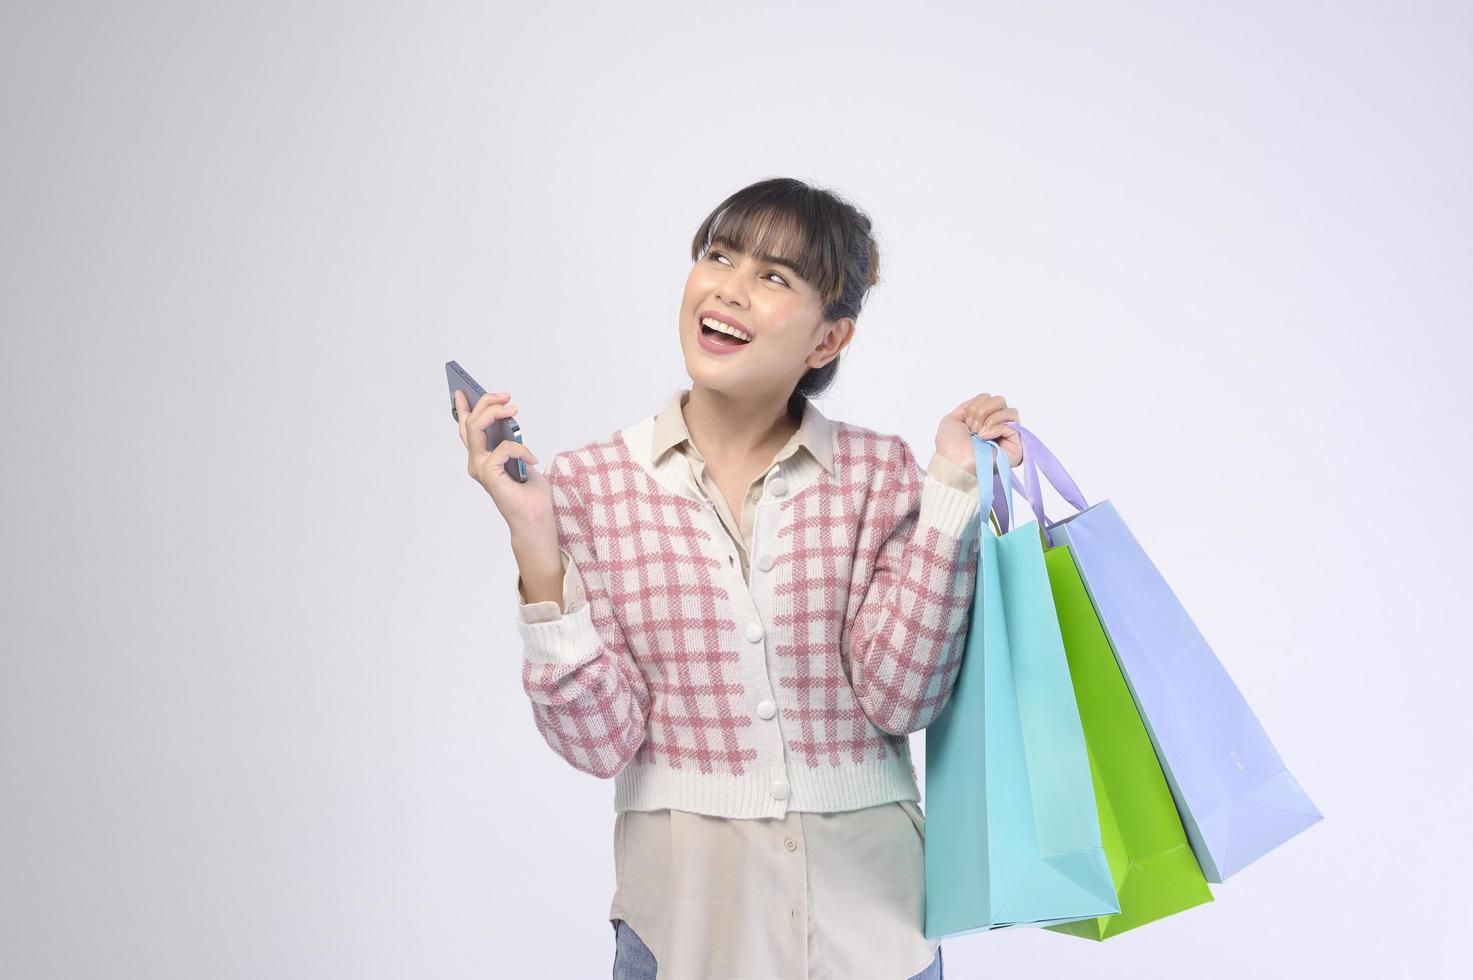 Attractive shopper woman holding shopping bags over white background photo